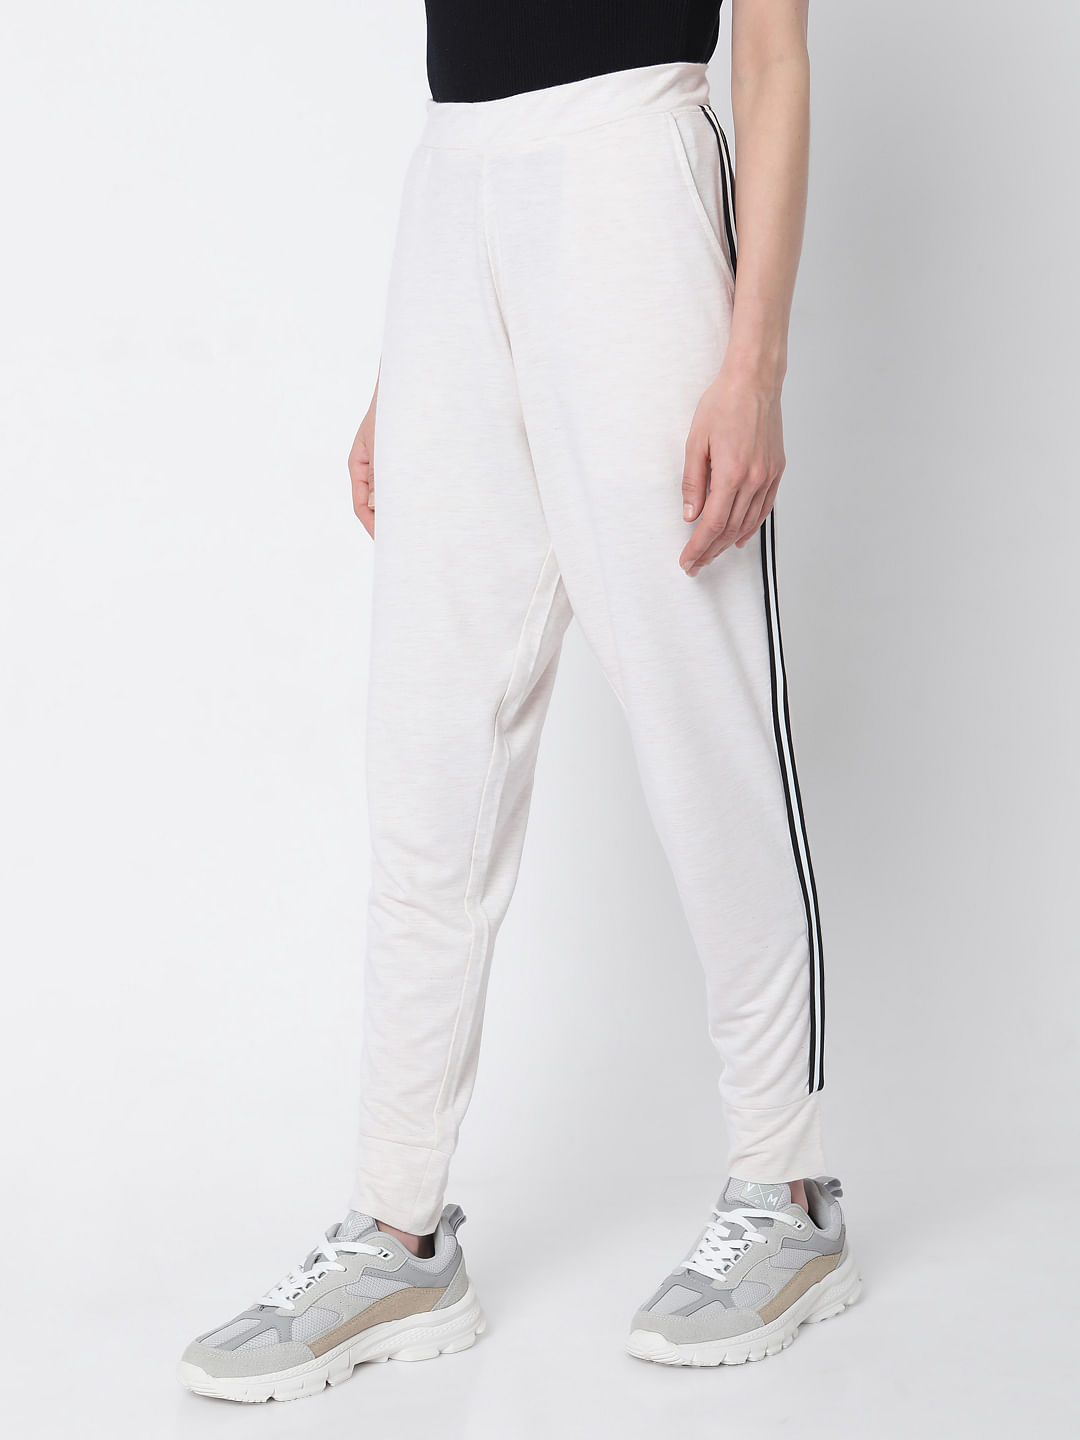 Buy White Track Pants for Men by A AND K Online | Ajio.com